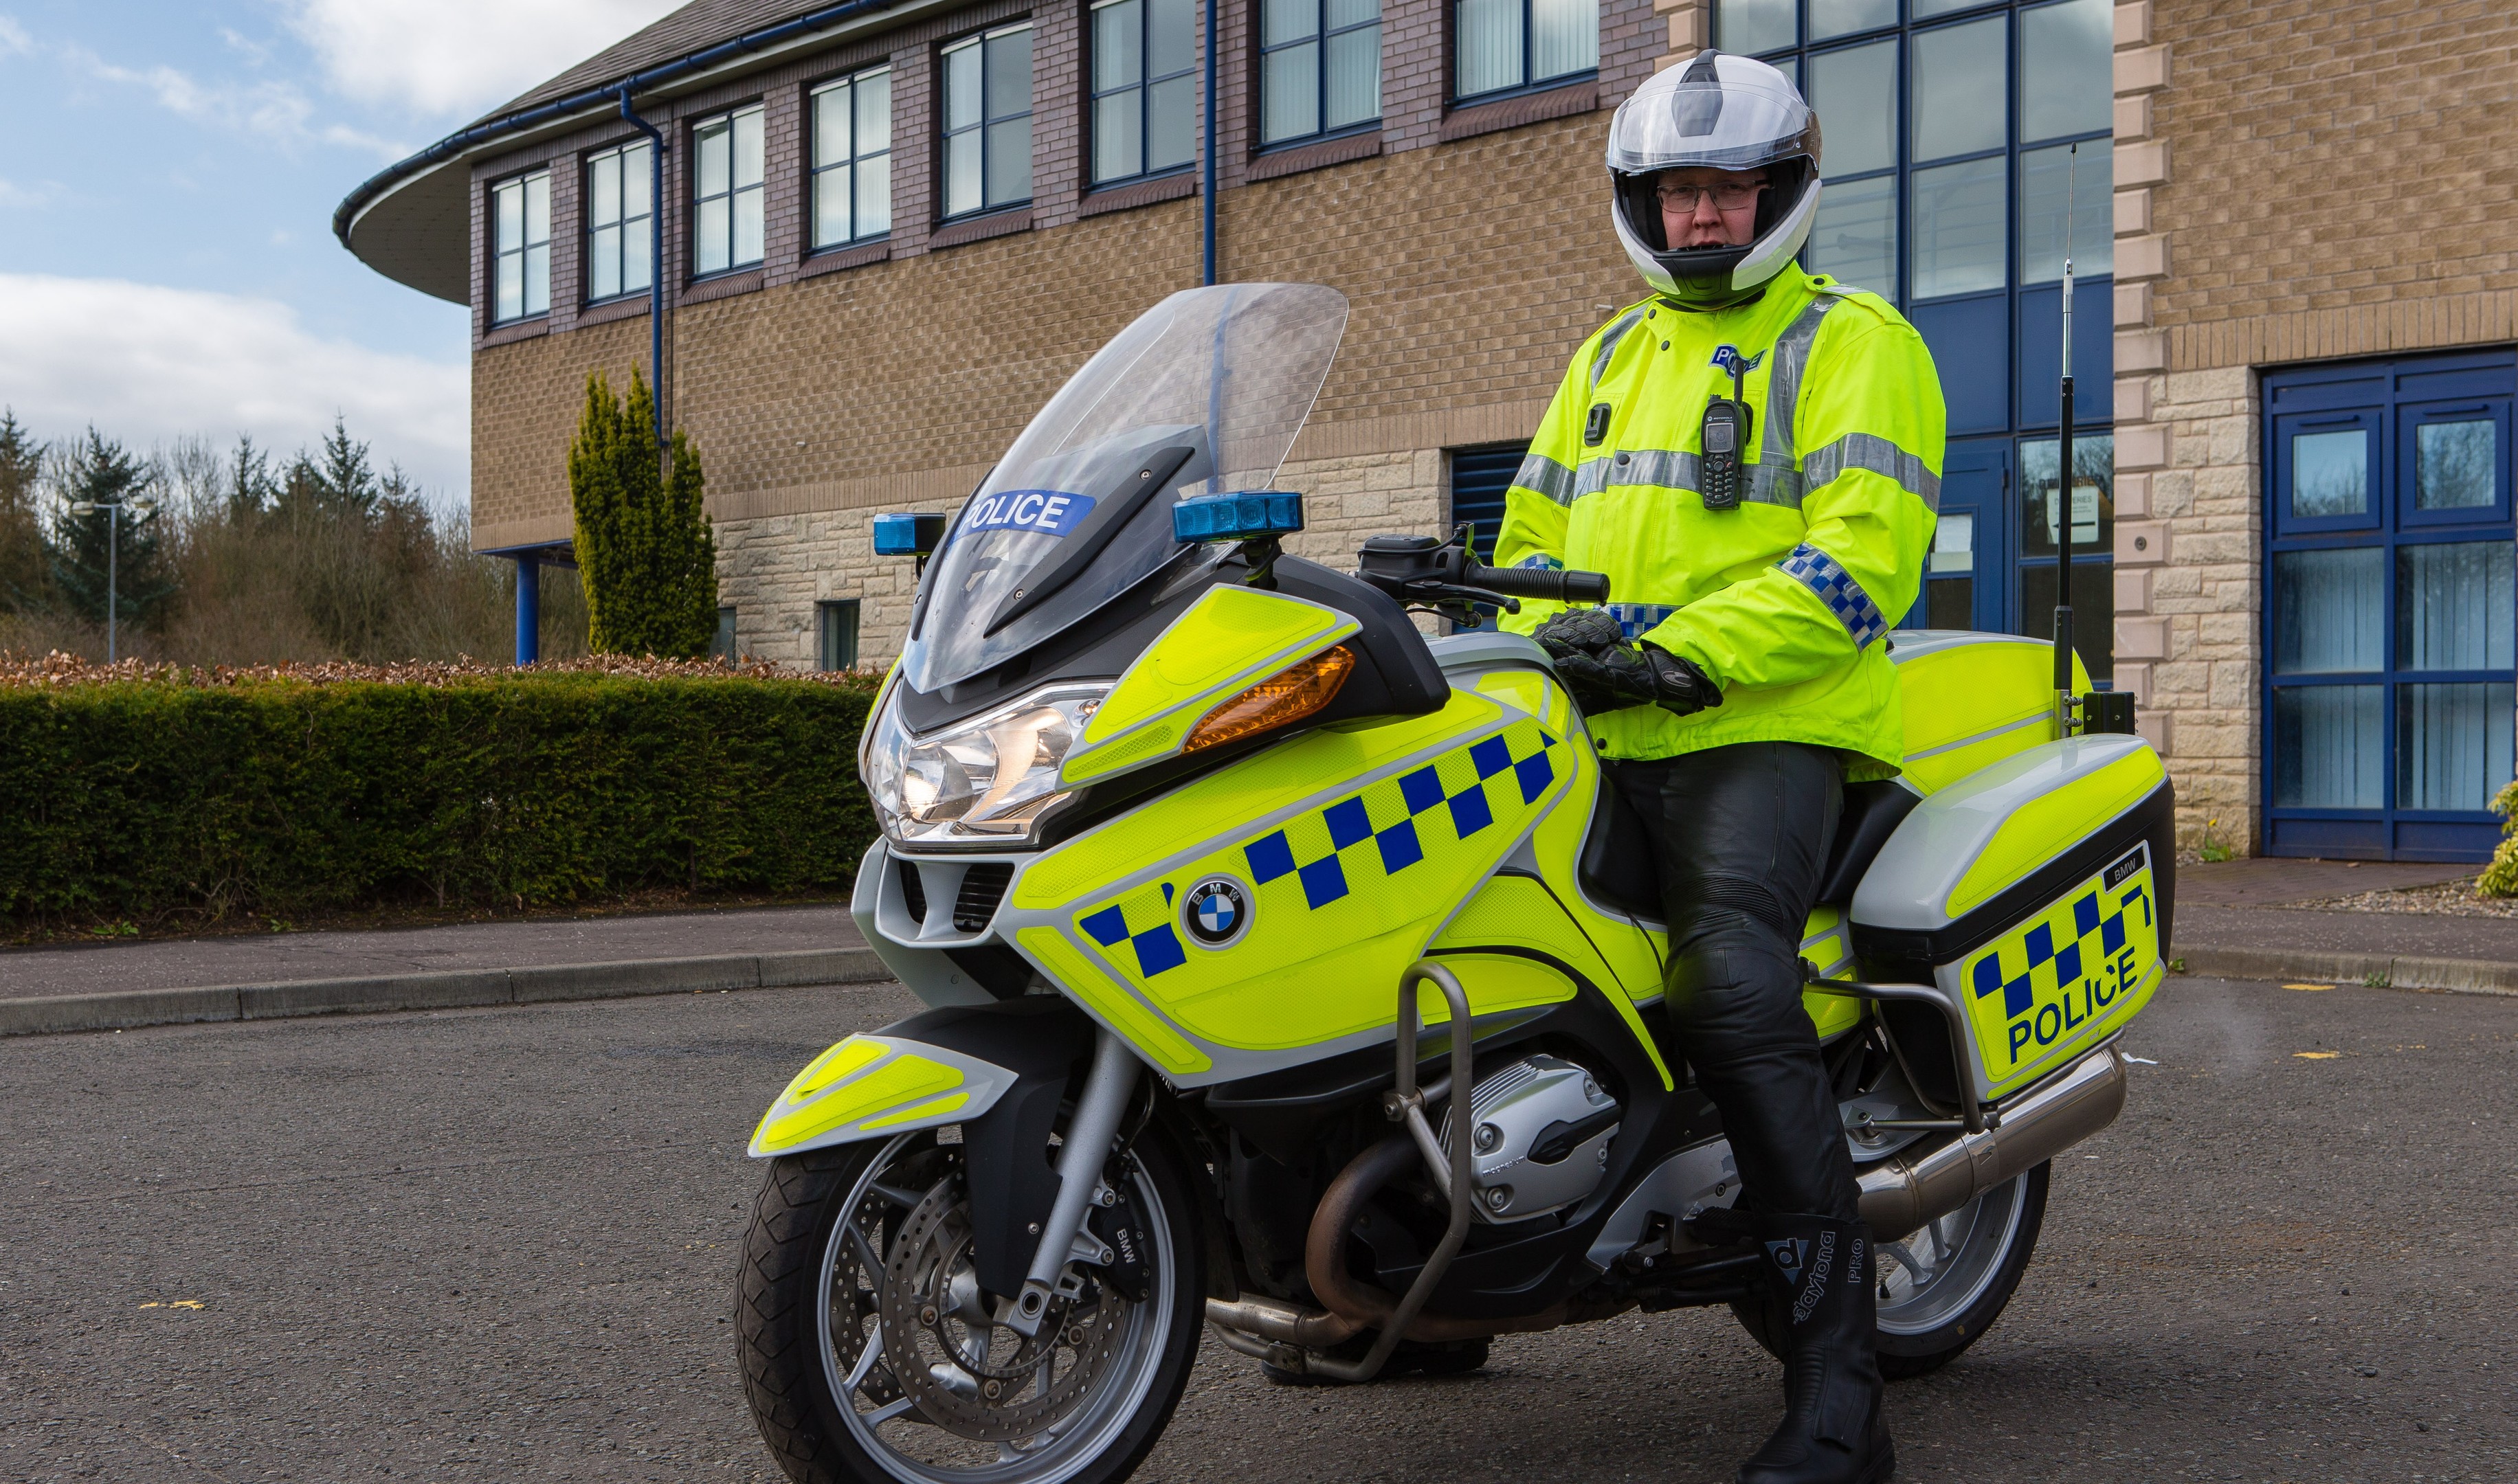 PC Alastair Purvis of Police Scotland Motorcycle Patrol is hoping to raise awareness of motorcyclists especially in the North East of Fife as summer approaches and to make drivers aware to keep an eye out for bikes as they visit the towns on the coast. Increased visible presence will be noticed.